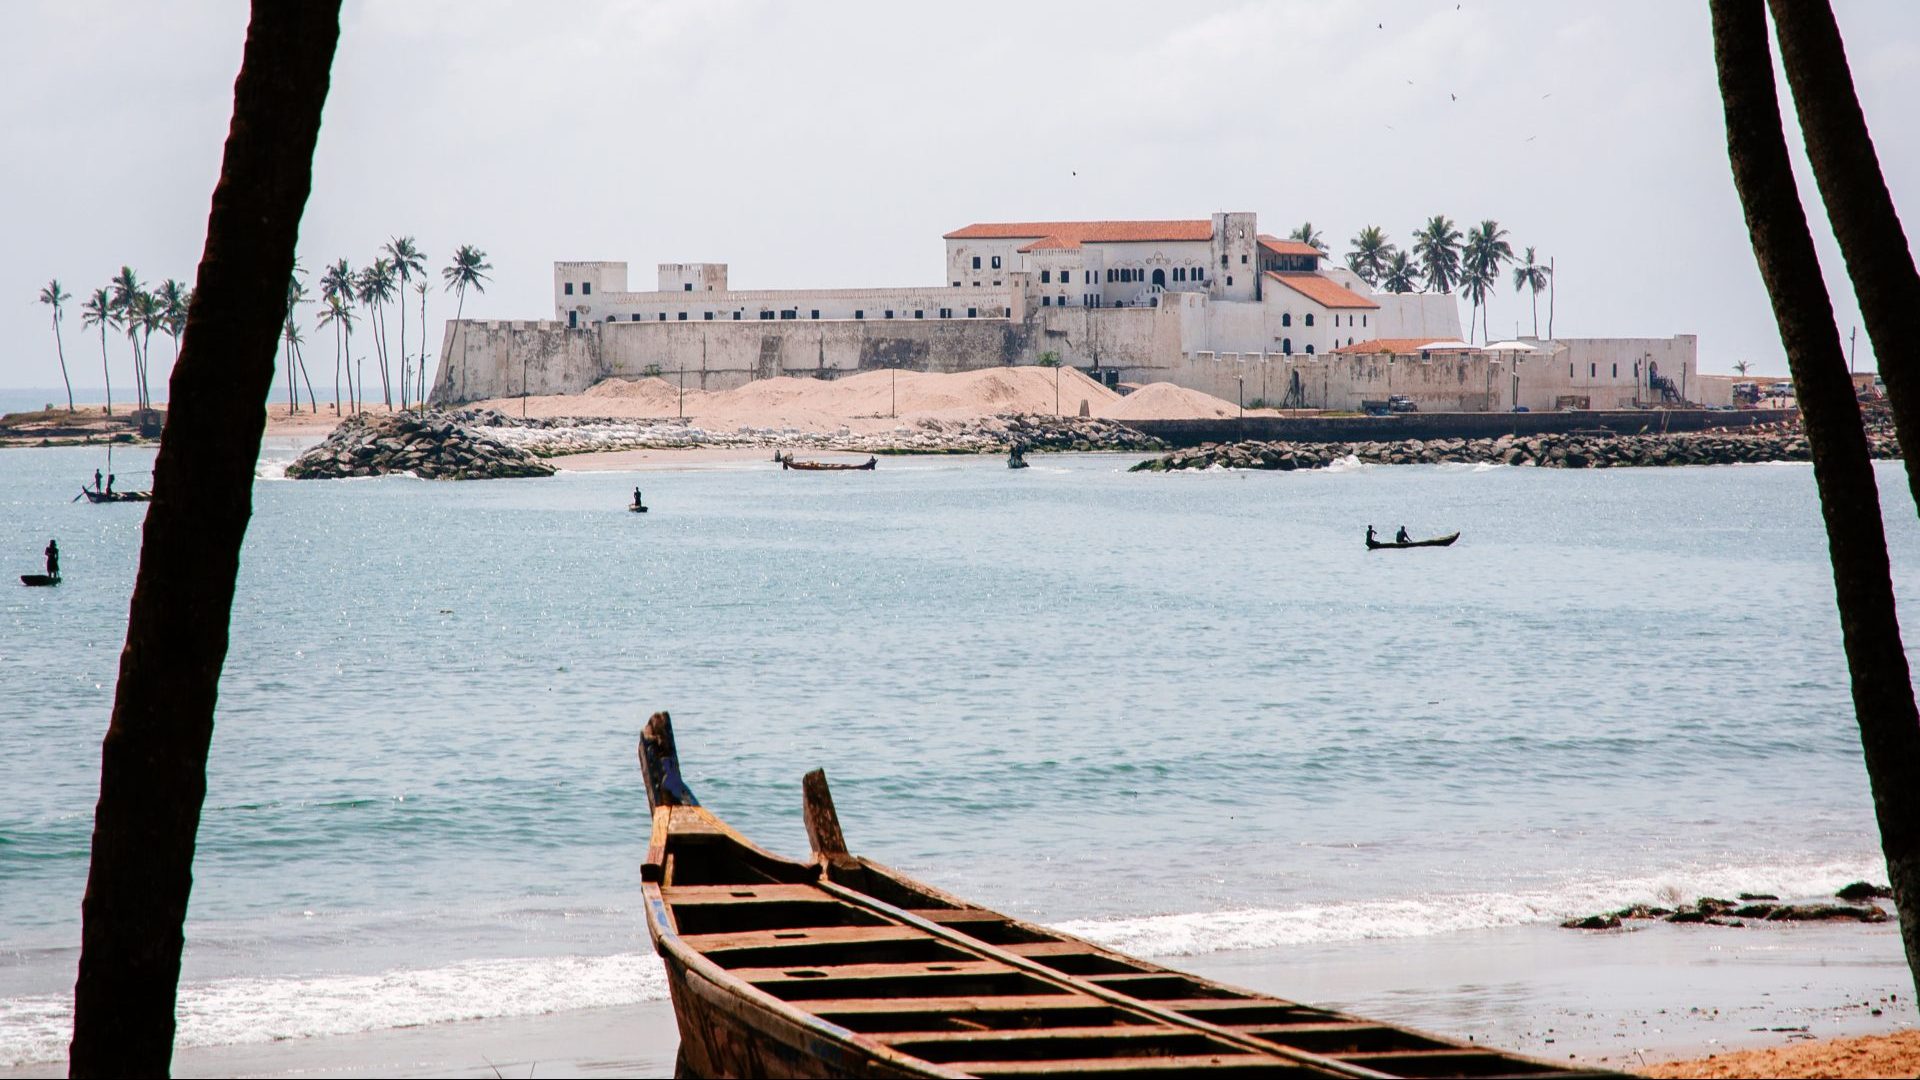 Elmina castle, ancient slave trading fort in Ghana. Photo: Raquel Maria Carbonell Pagola
